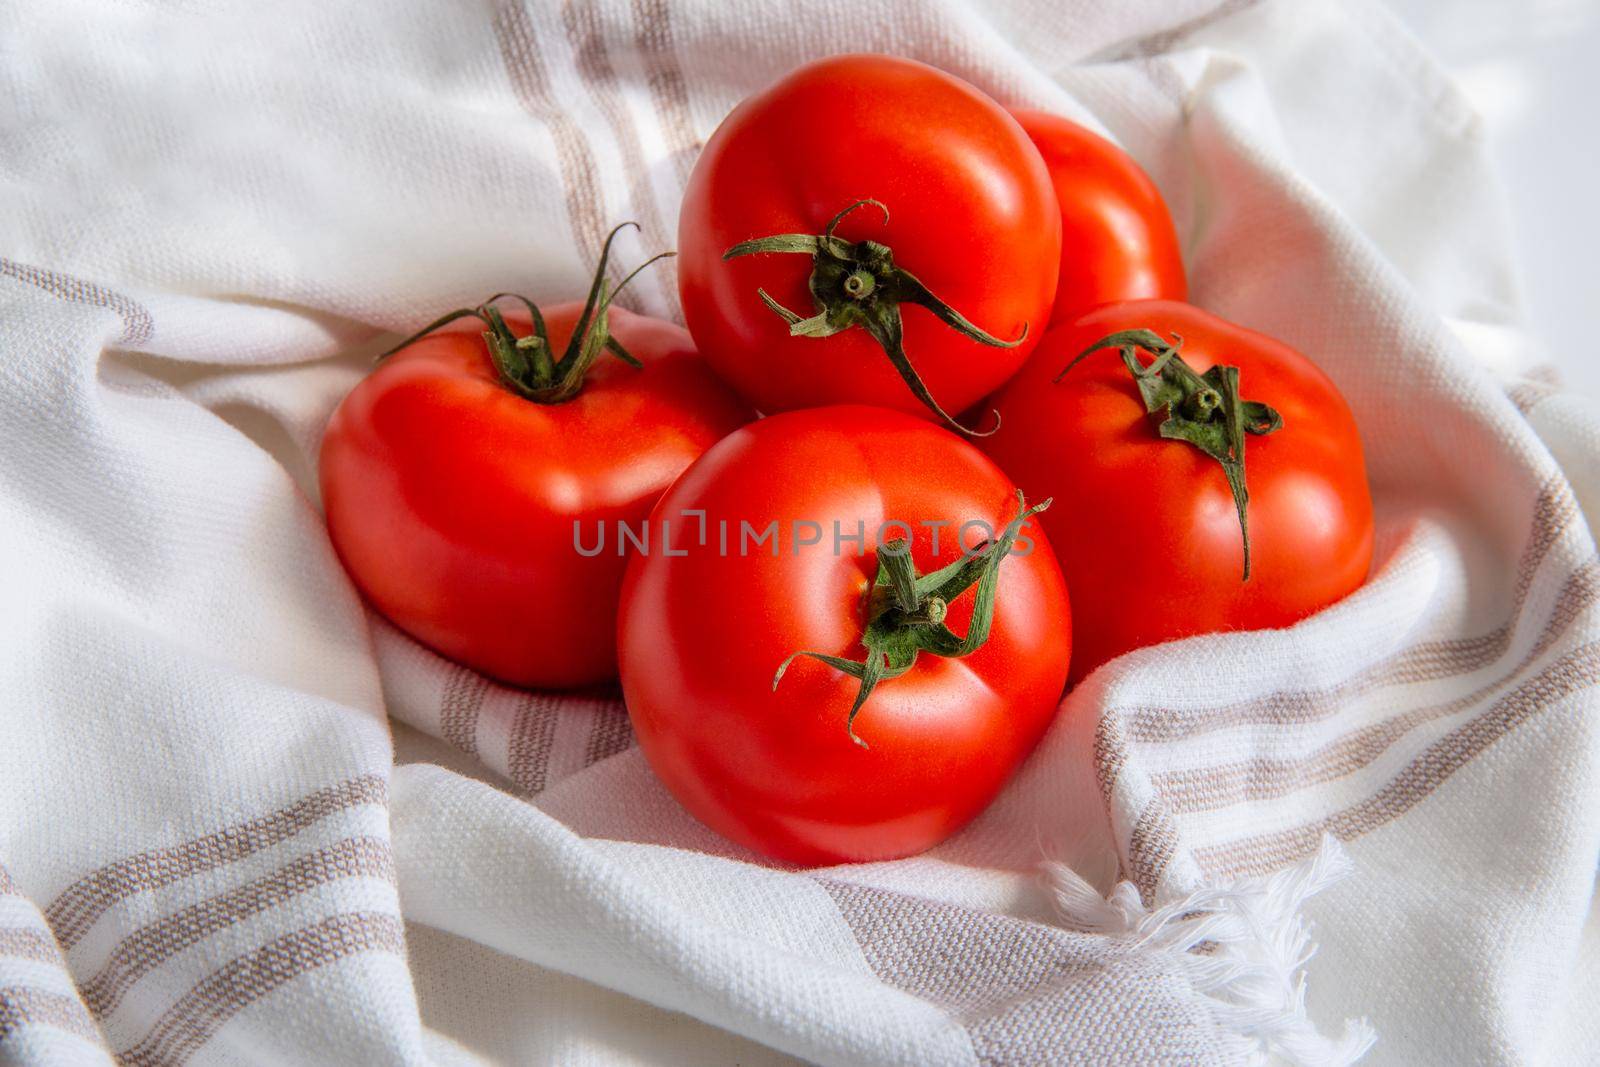 Ripe fresh red tomatoes in a linen towel under soft sunlight